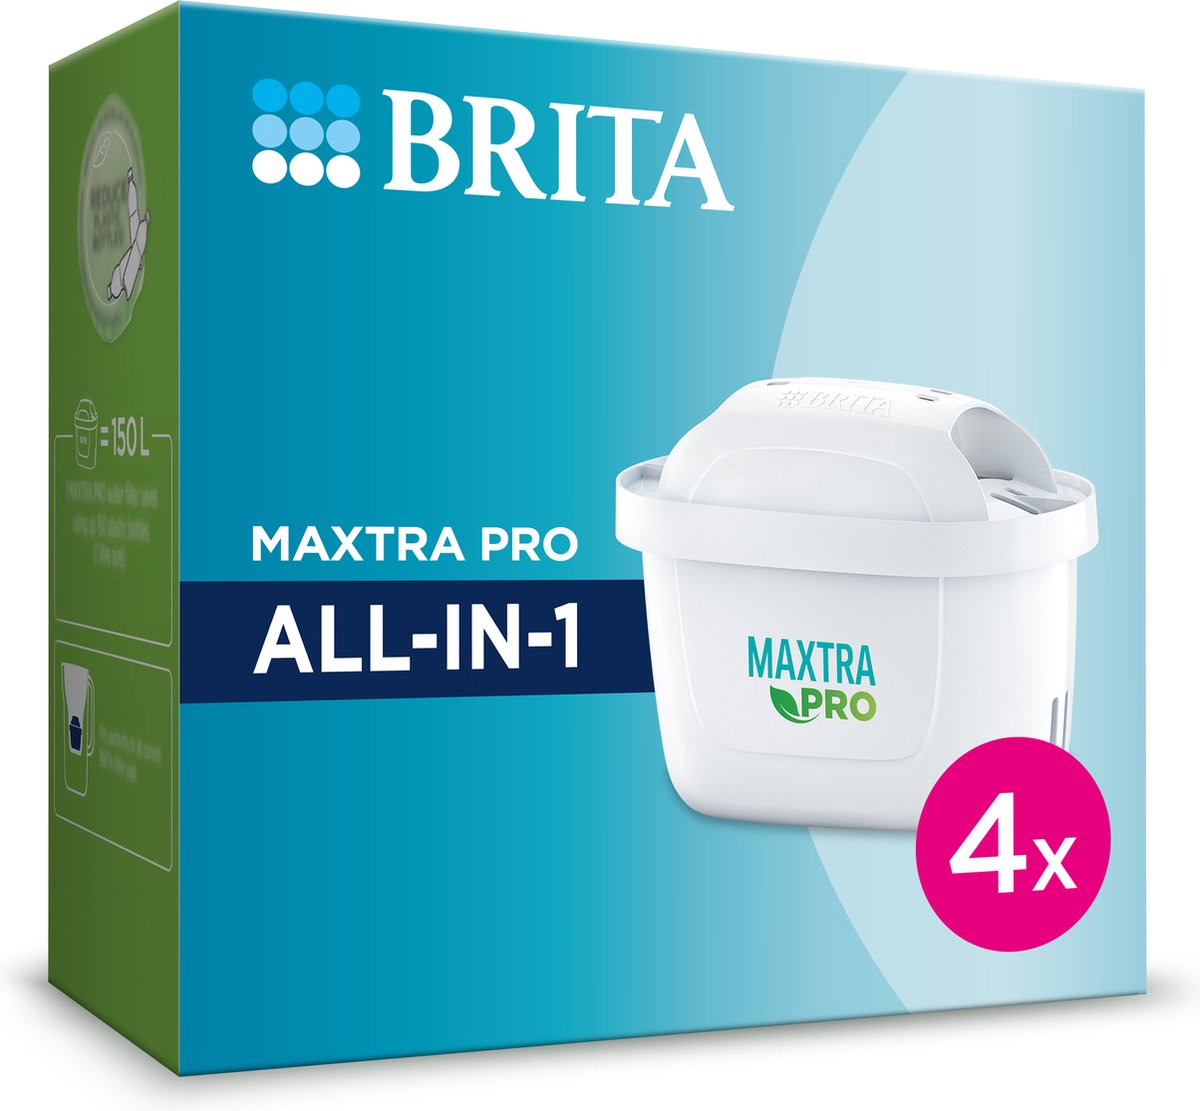 Brita - Waterfilterpatroon - Maxtra Pro All-in-1 - 4 Pack